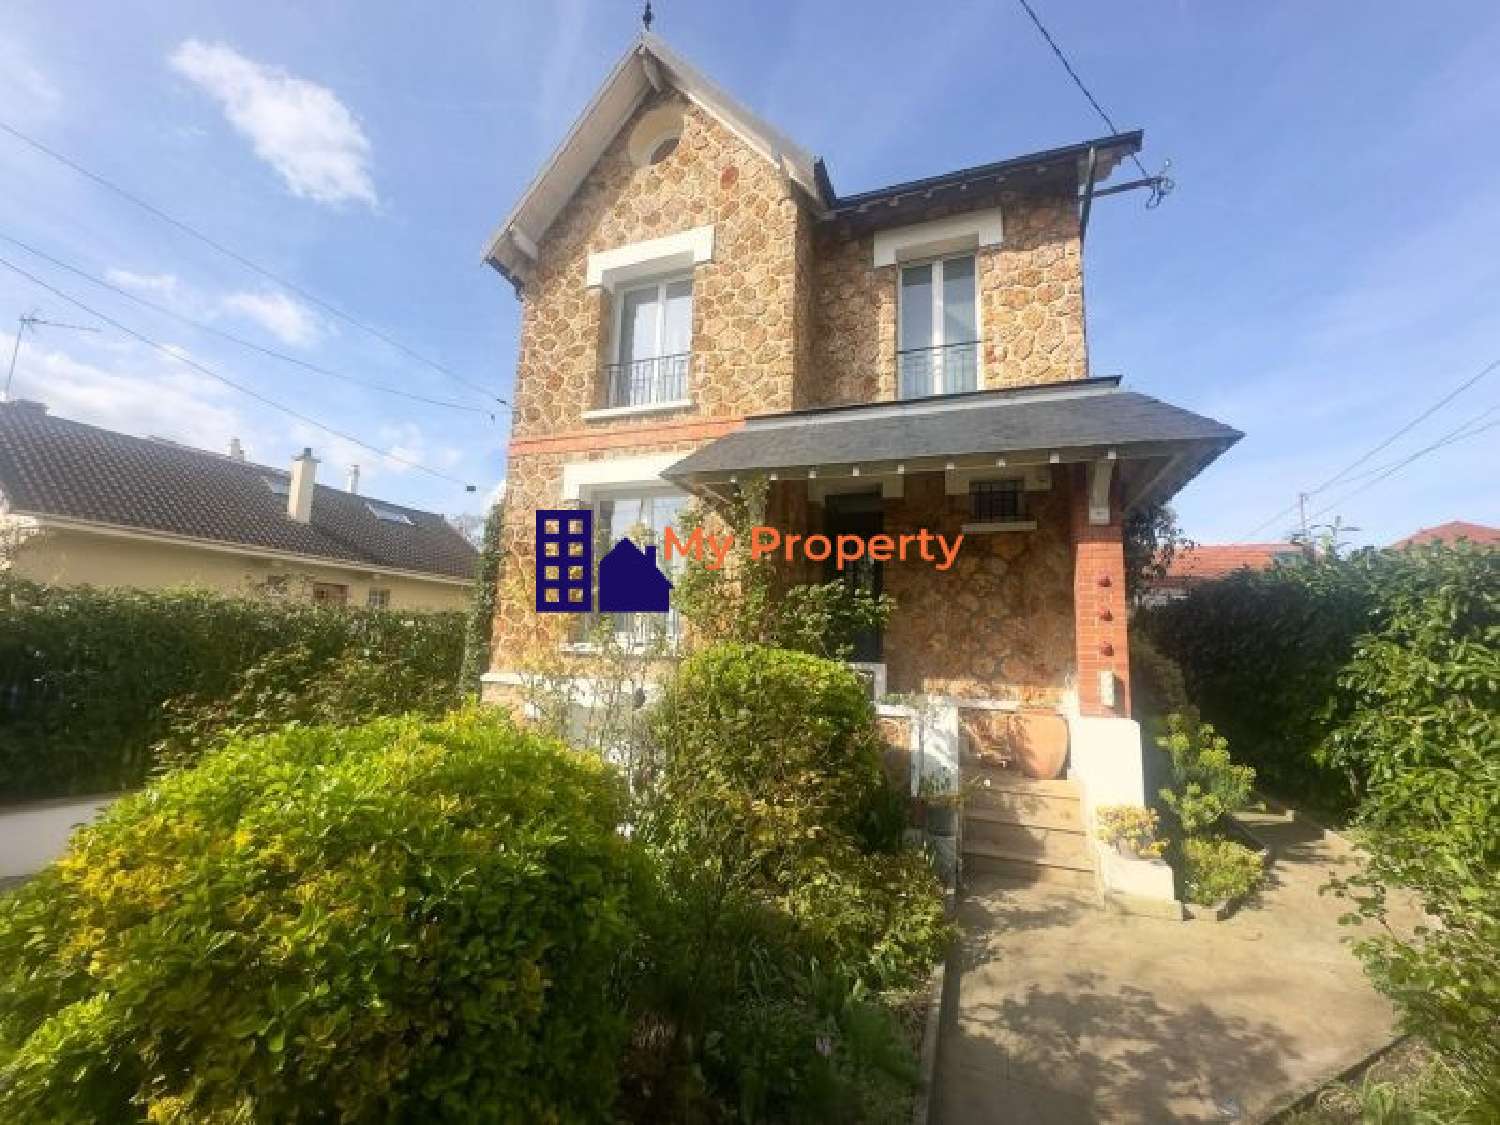  for sale house Houilles Yvelines 1